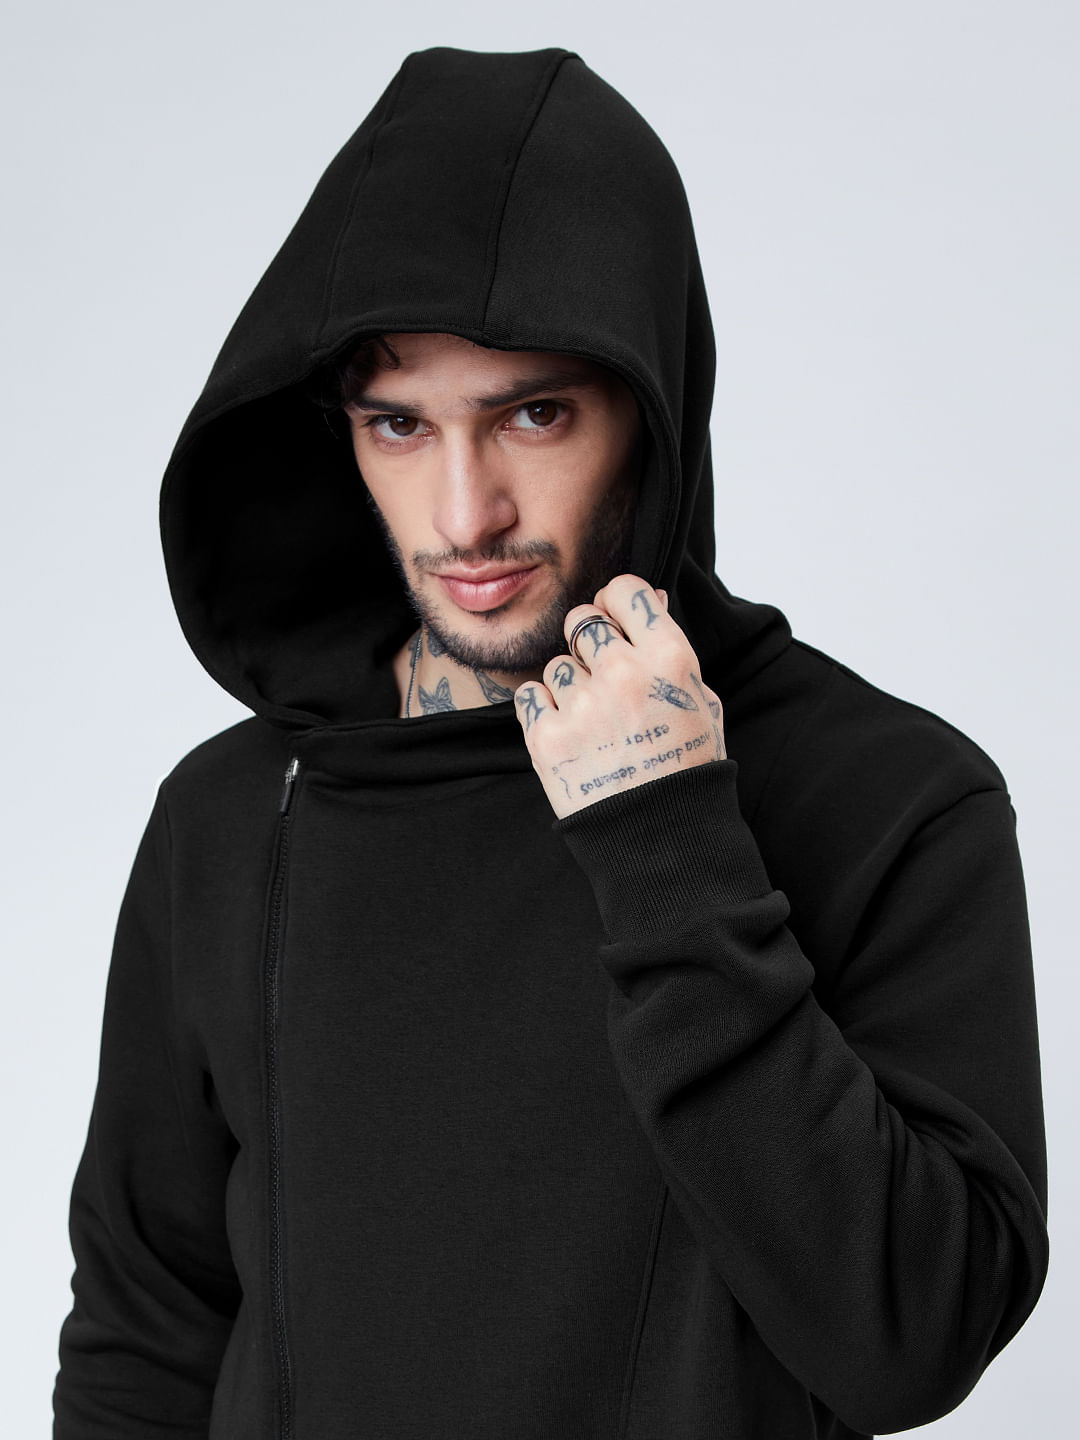 Buy The Assassin Hoodie Hoodies online at The Souled Store.